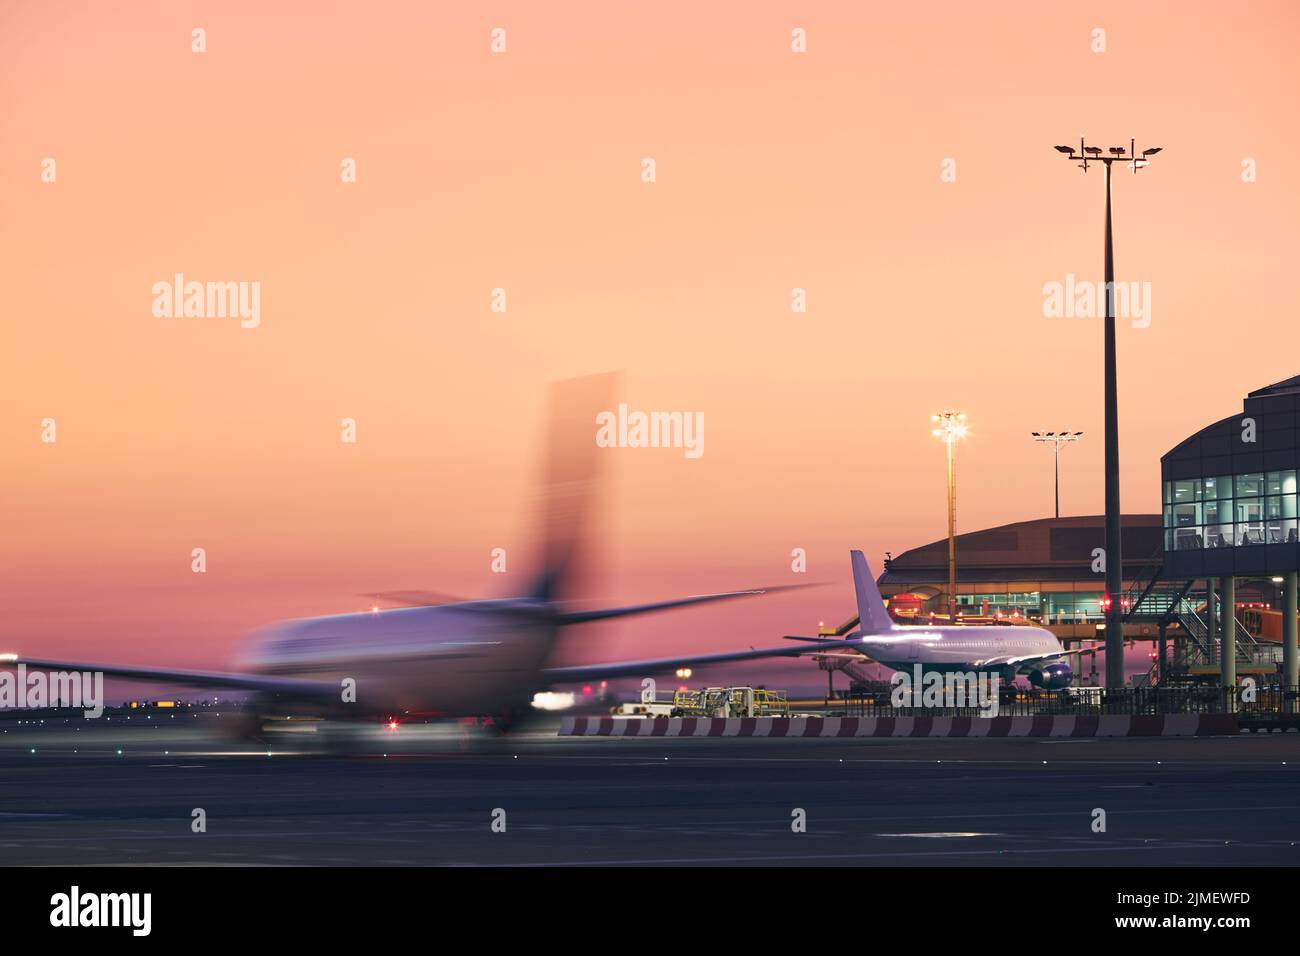 Airplane in blurred motion. Traffic at airport during colorful sunrise. Stock Photo